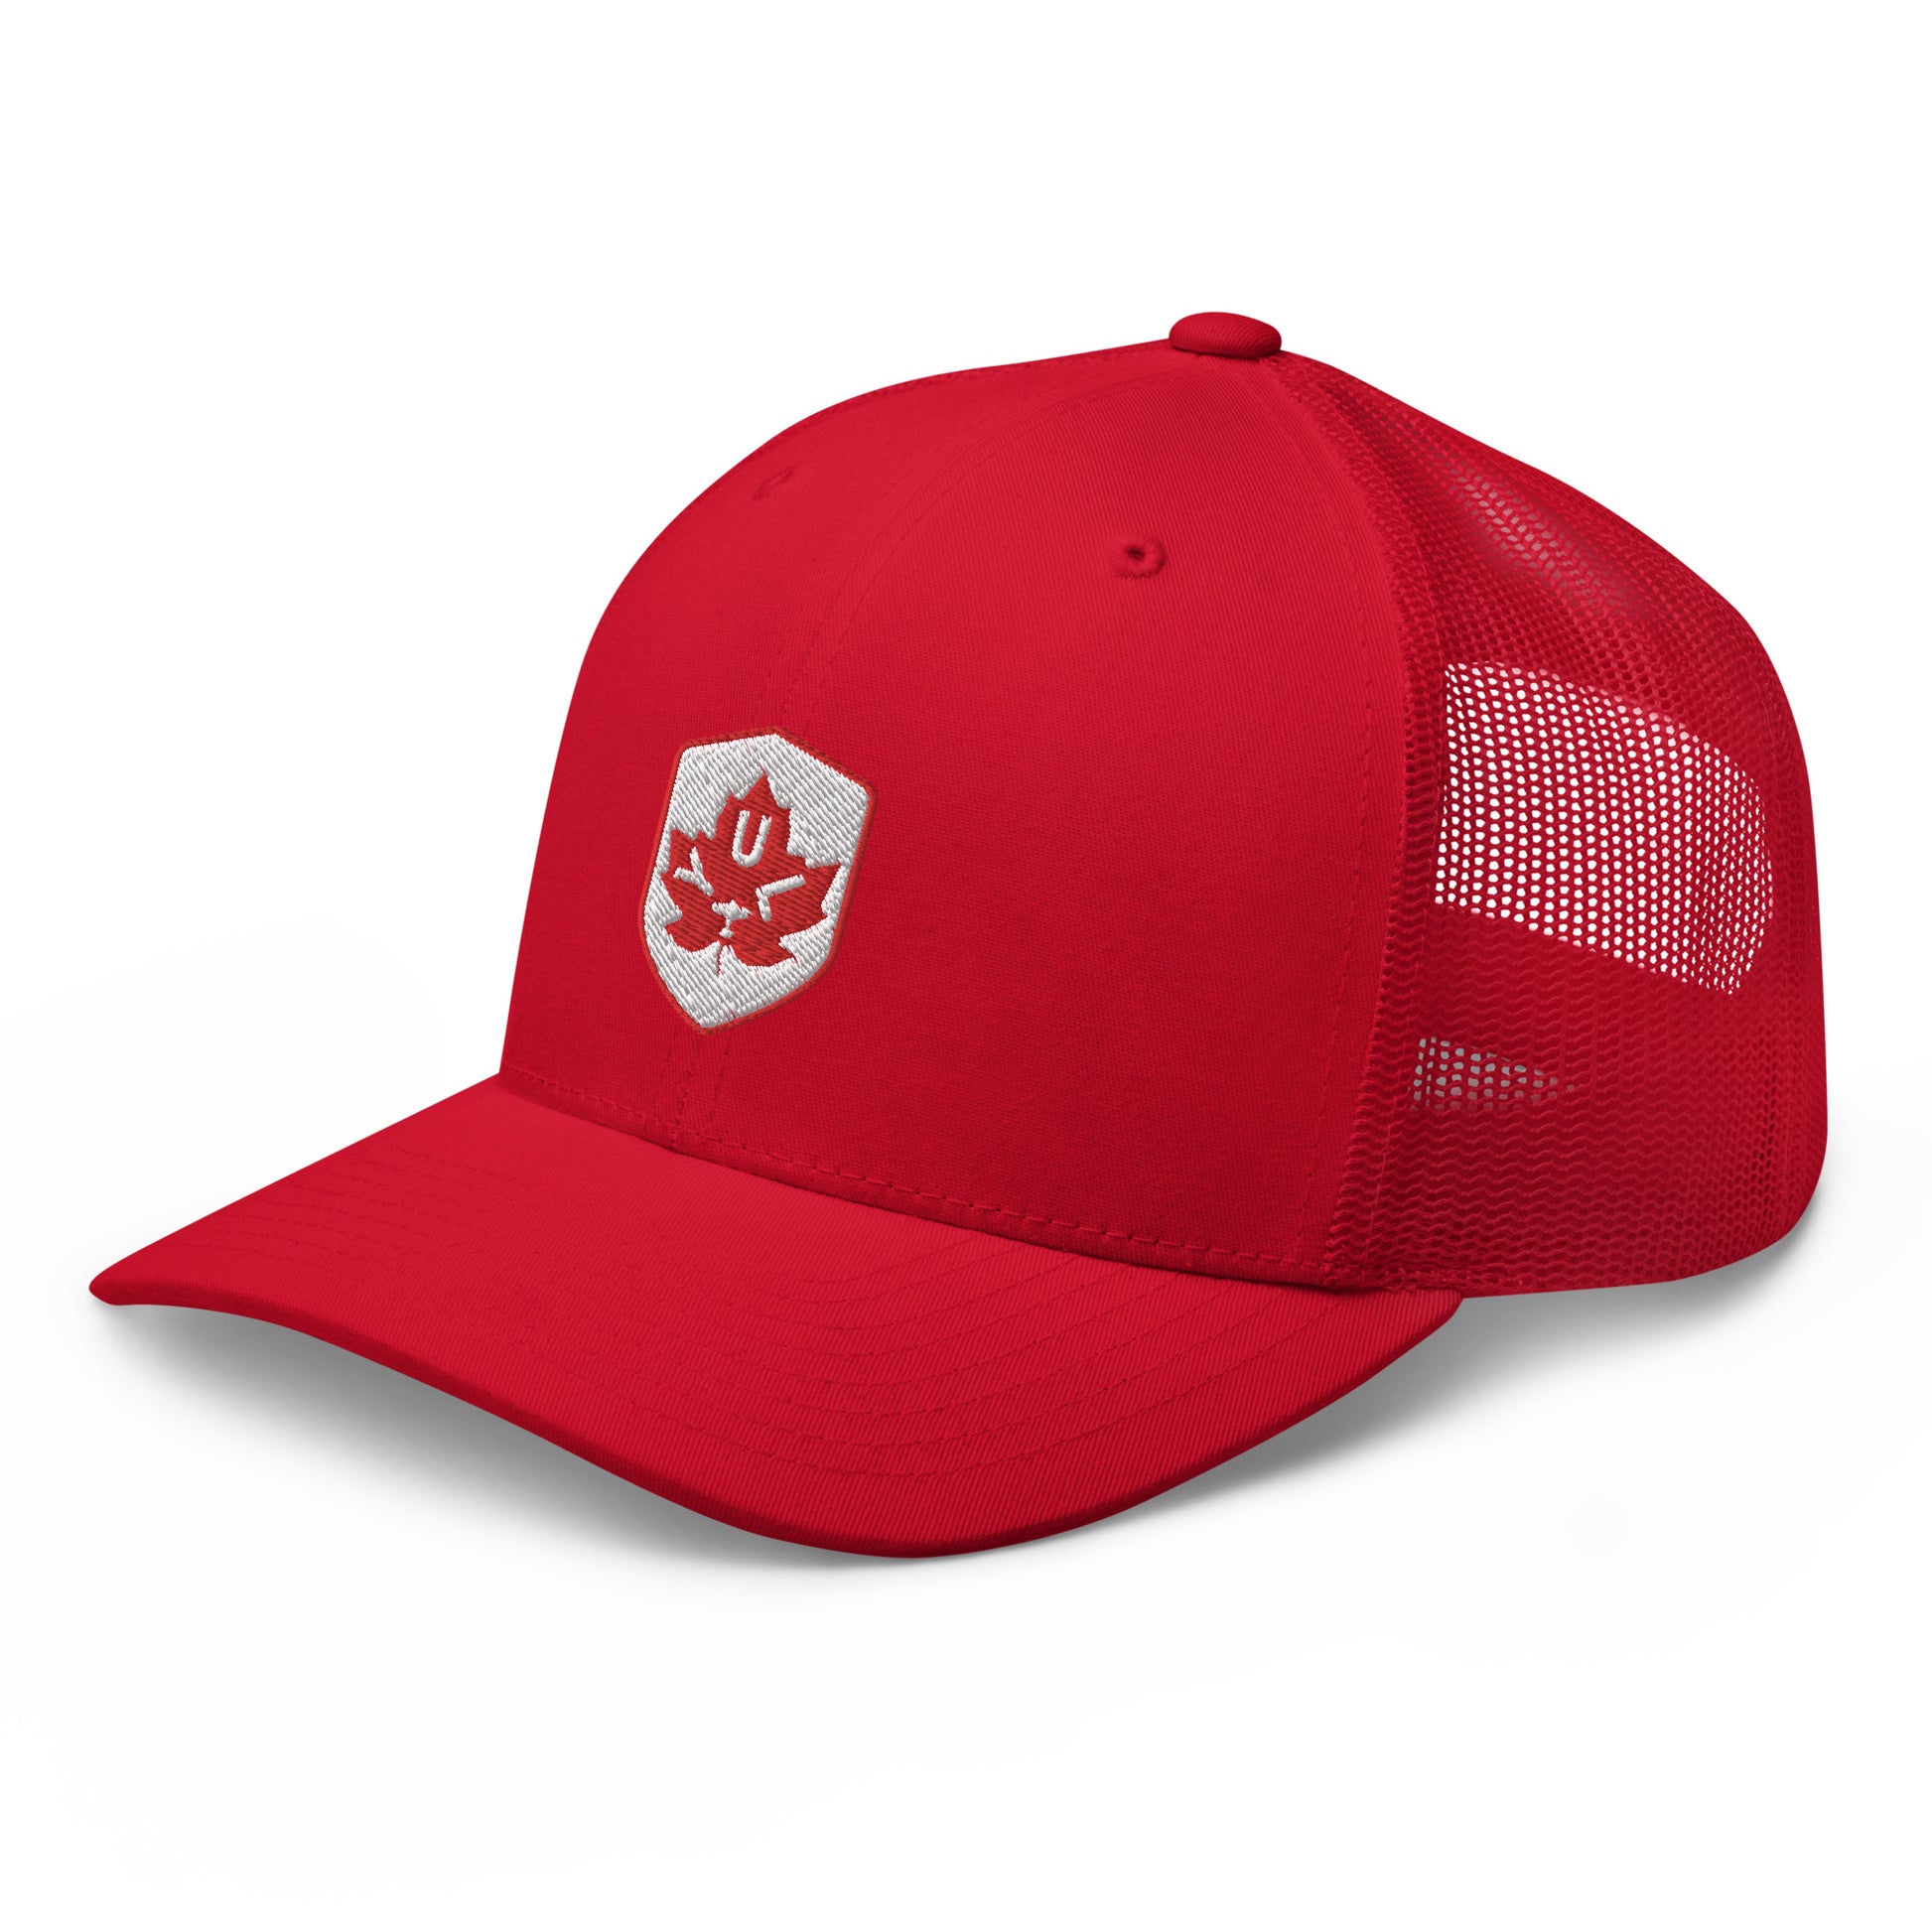 Maple Leaf Trucker Hat - Red/White • YUL Montreal • YHM Designs - Image 25